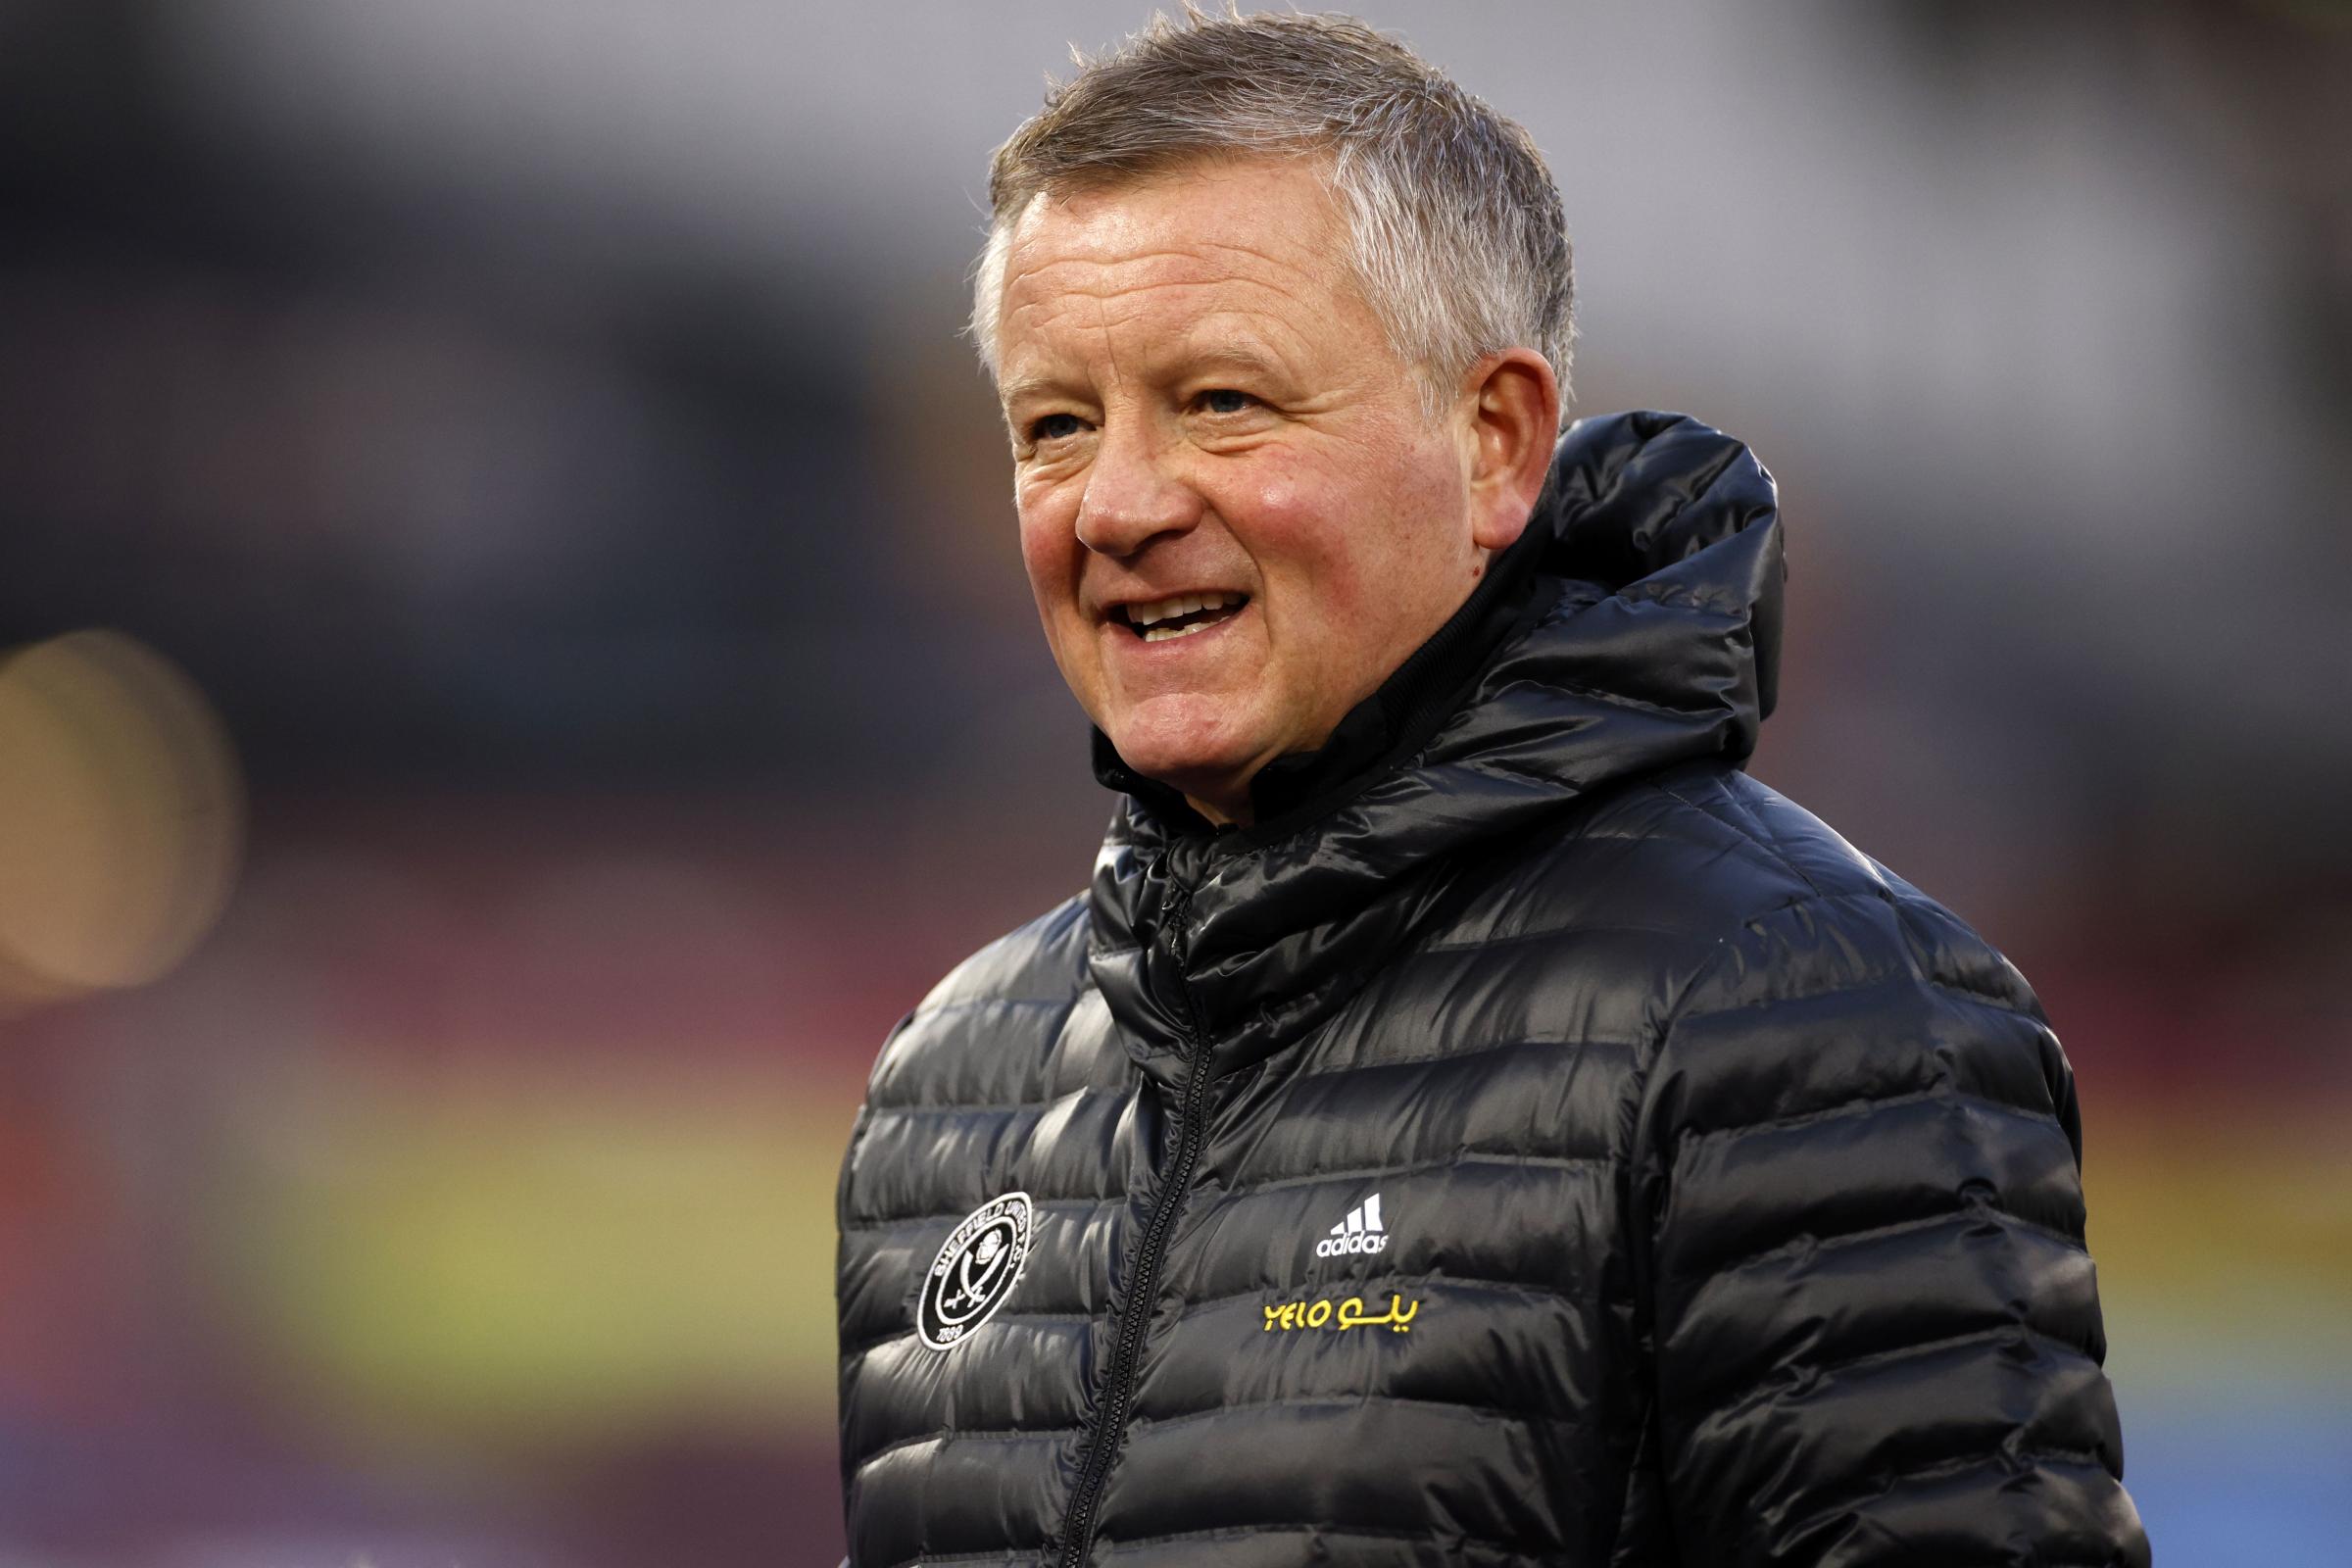 Chris Wilder says he and Boro's recruitment staff are 'on the same page'